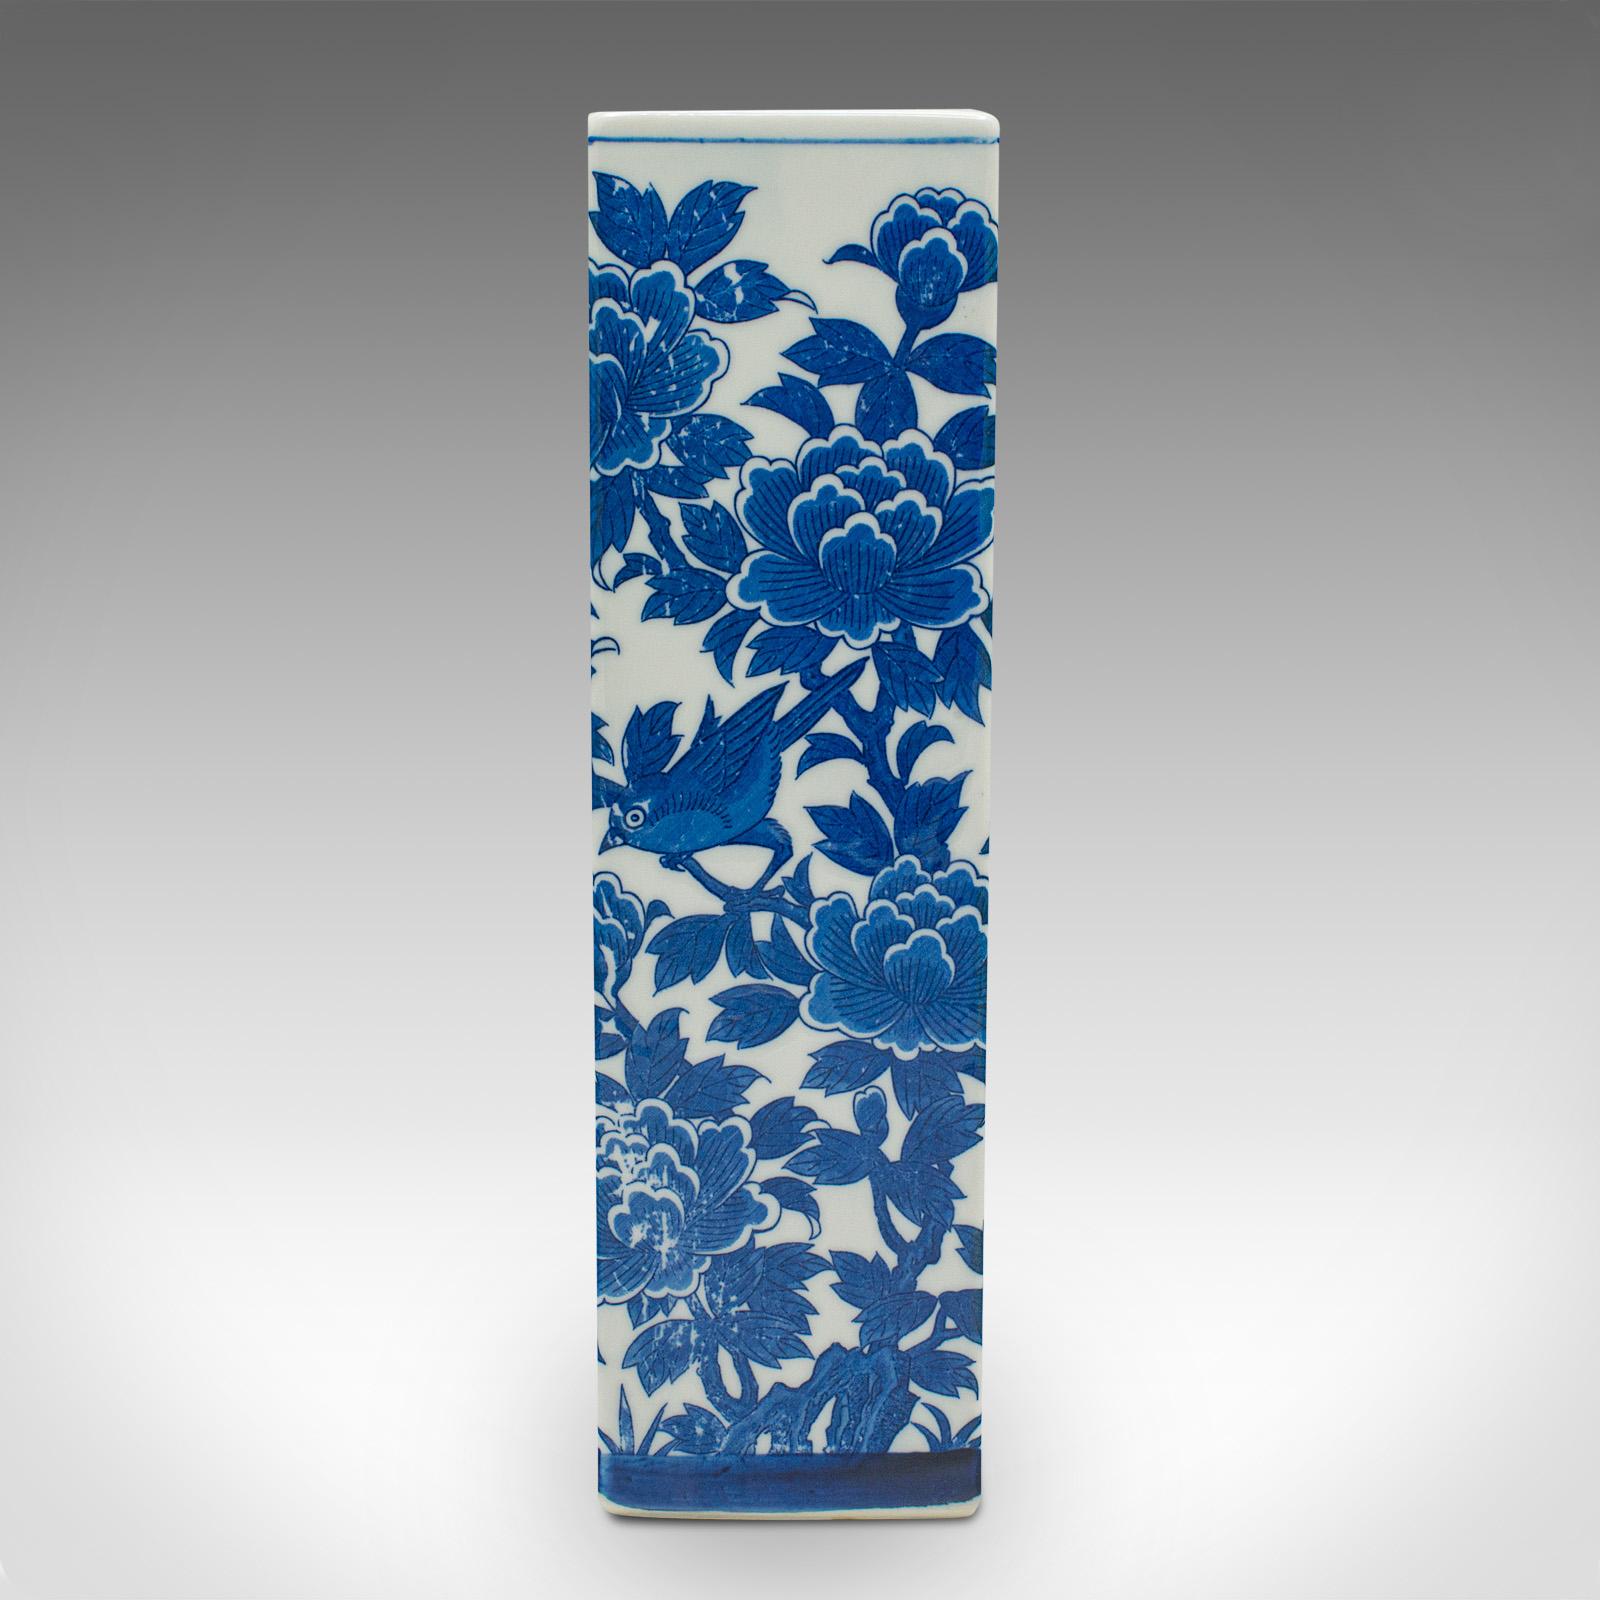 This is a vintage stem vase. A Chinese, ceramic flower sleeve with blue and white decoration, dating to the late 20th century, circa 1970.

Appealing square form with a bold decorative pattern
Displays a desirable aged patina and in good order
Crisp